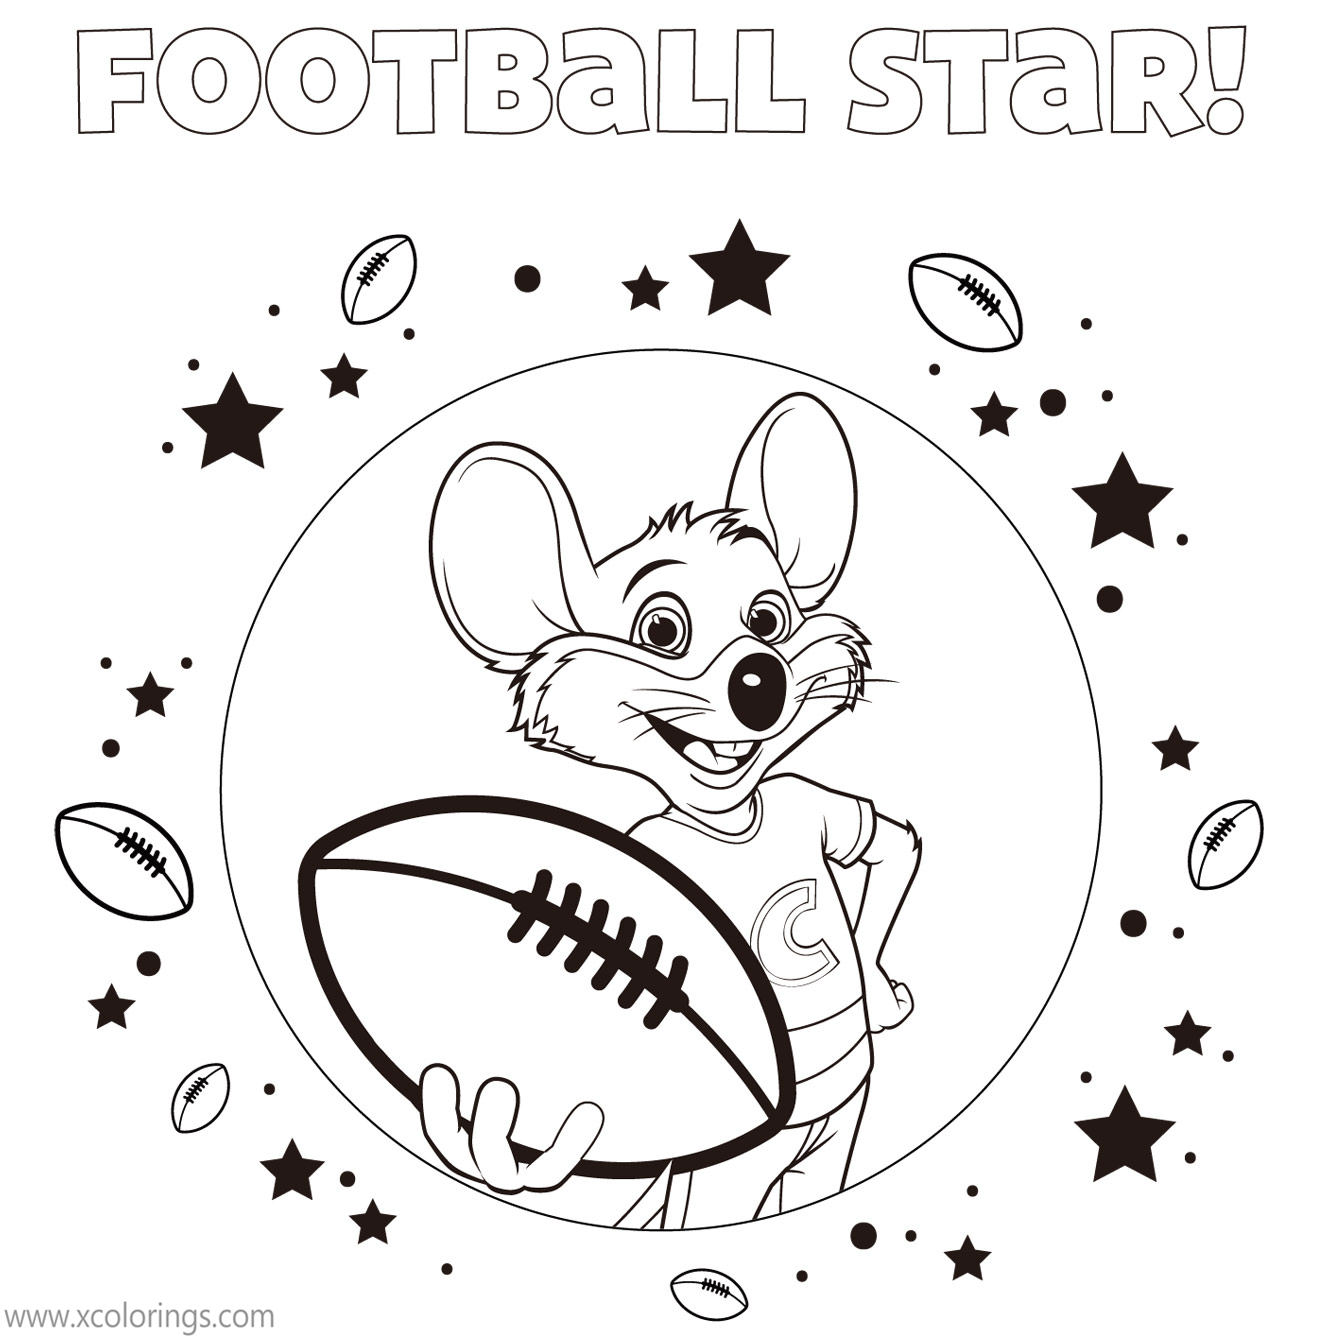 Free Chuck E Cheese Coloring Pages Football Star printable